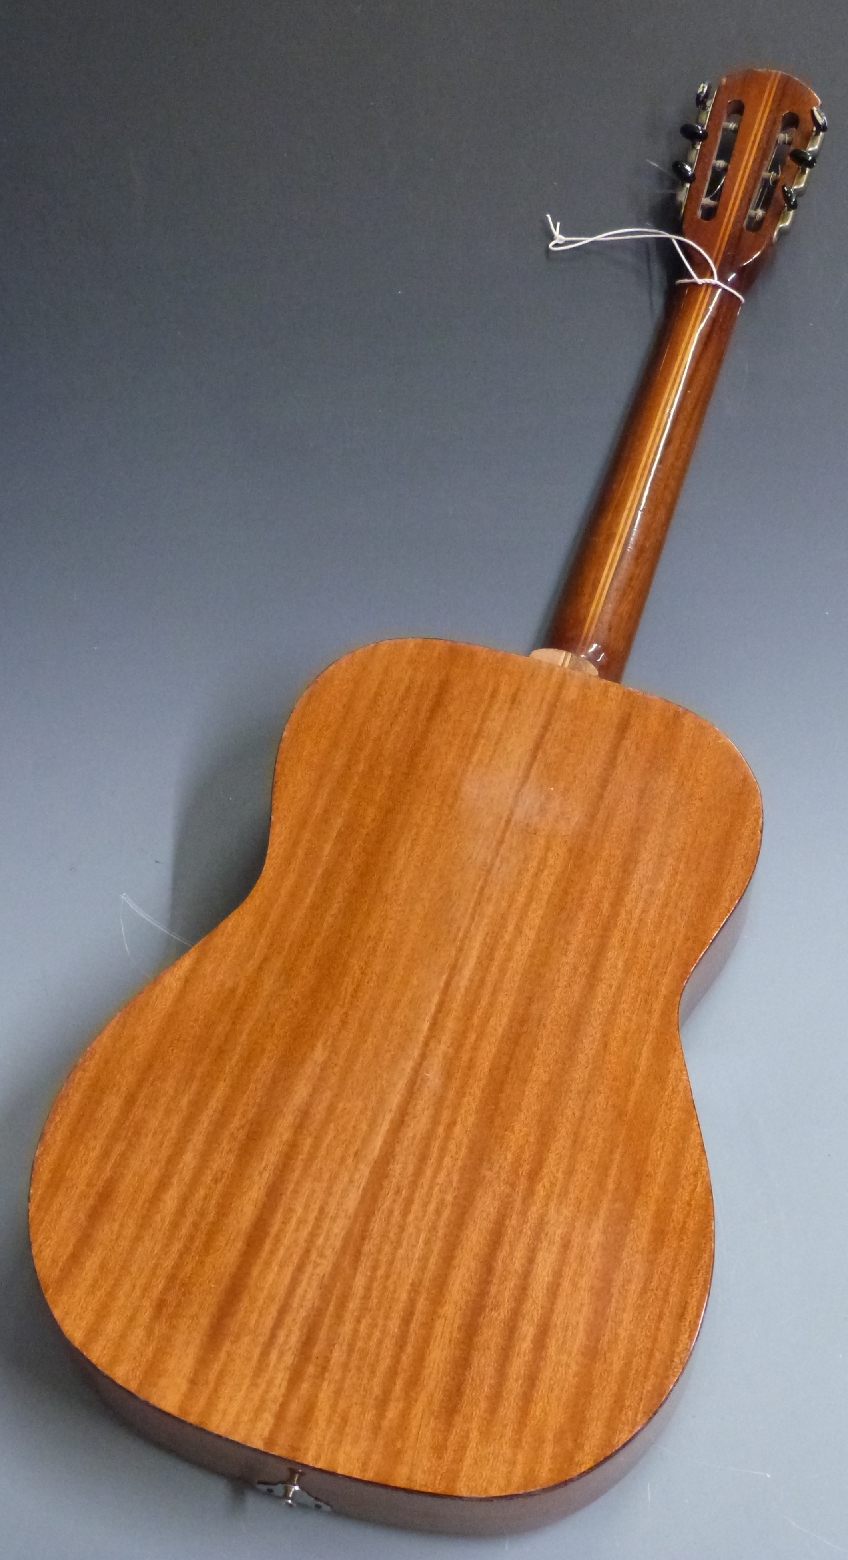 Eko acoustic guitar 1963, reg no 0029721, Italian made, fitted with six nylon strings, in - Image 3 of 3